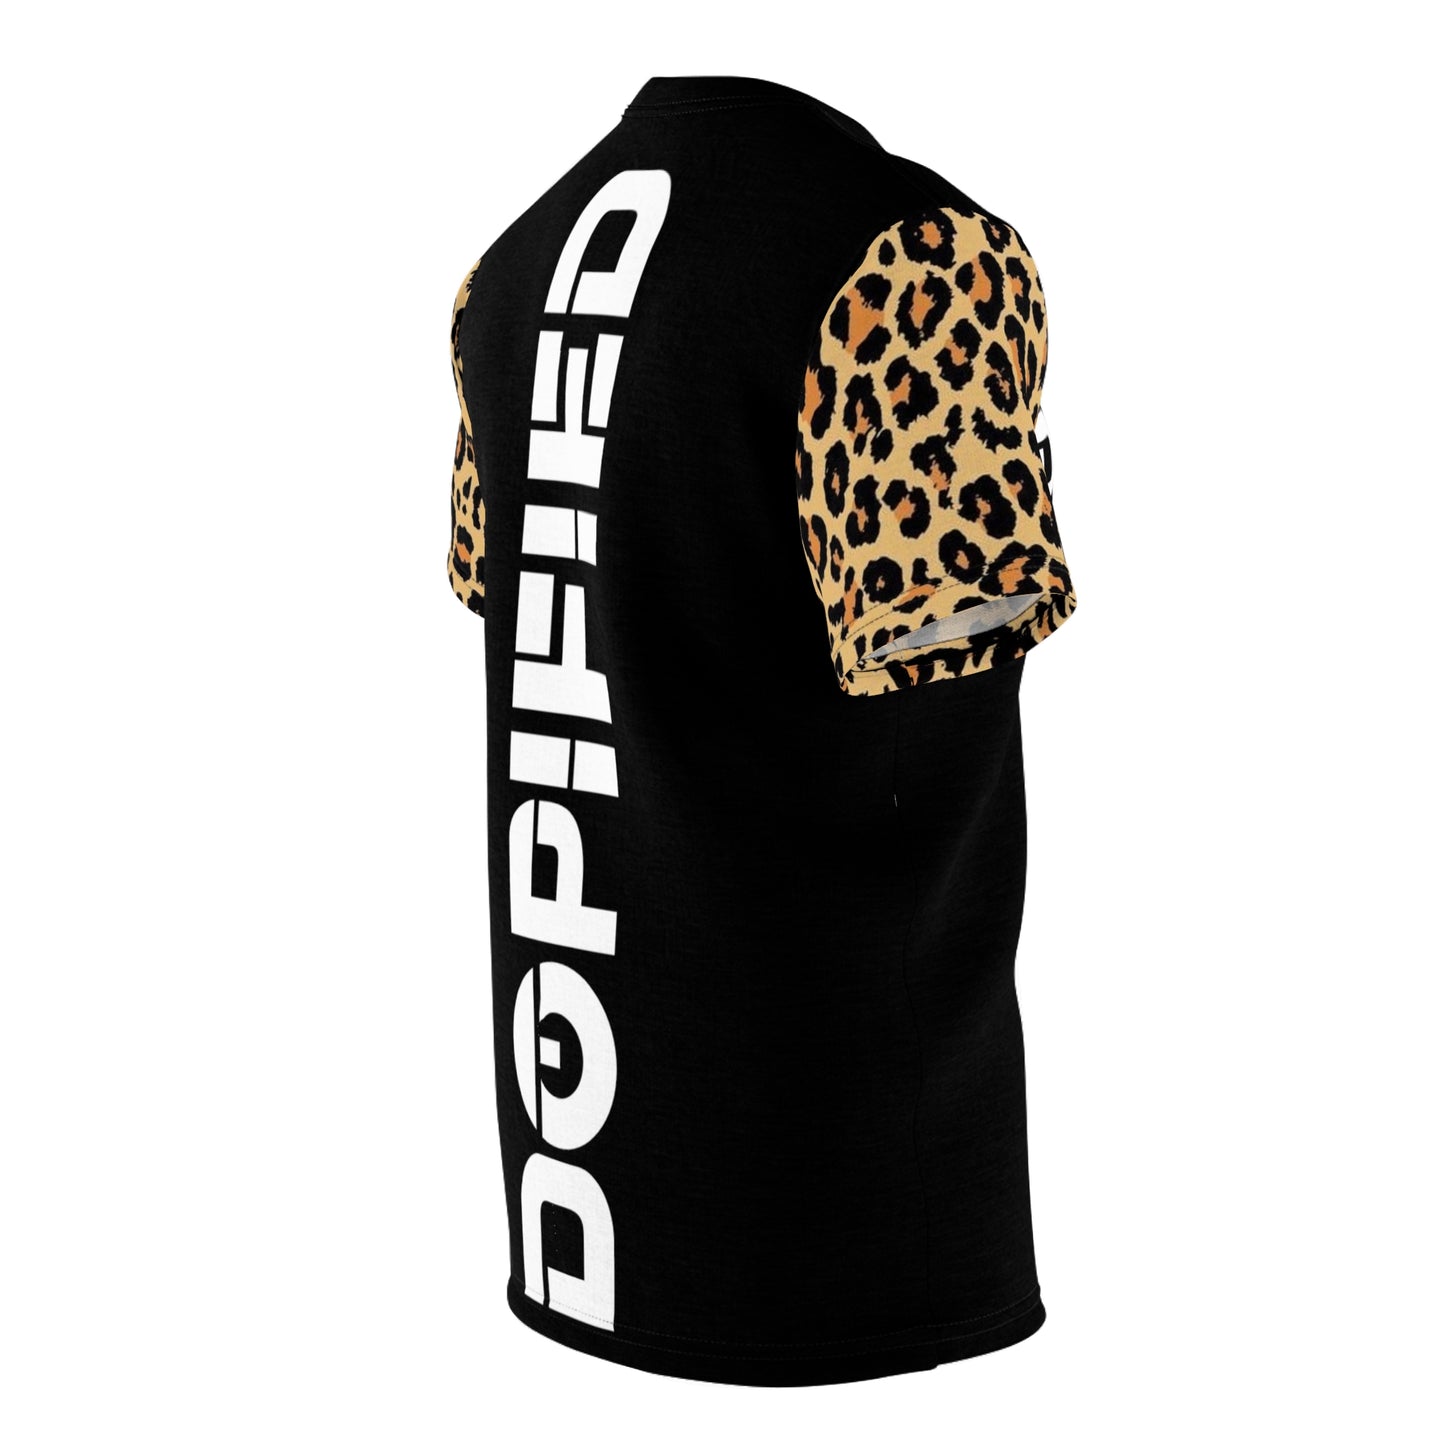 DOPiFiED Leopard Edition tee